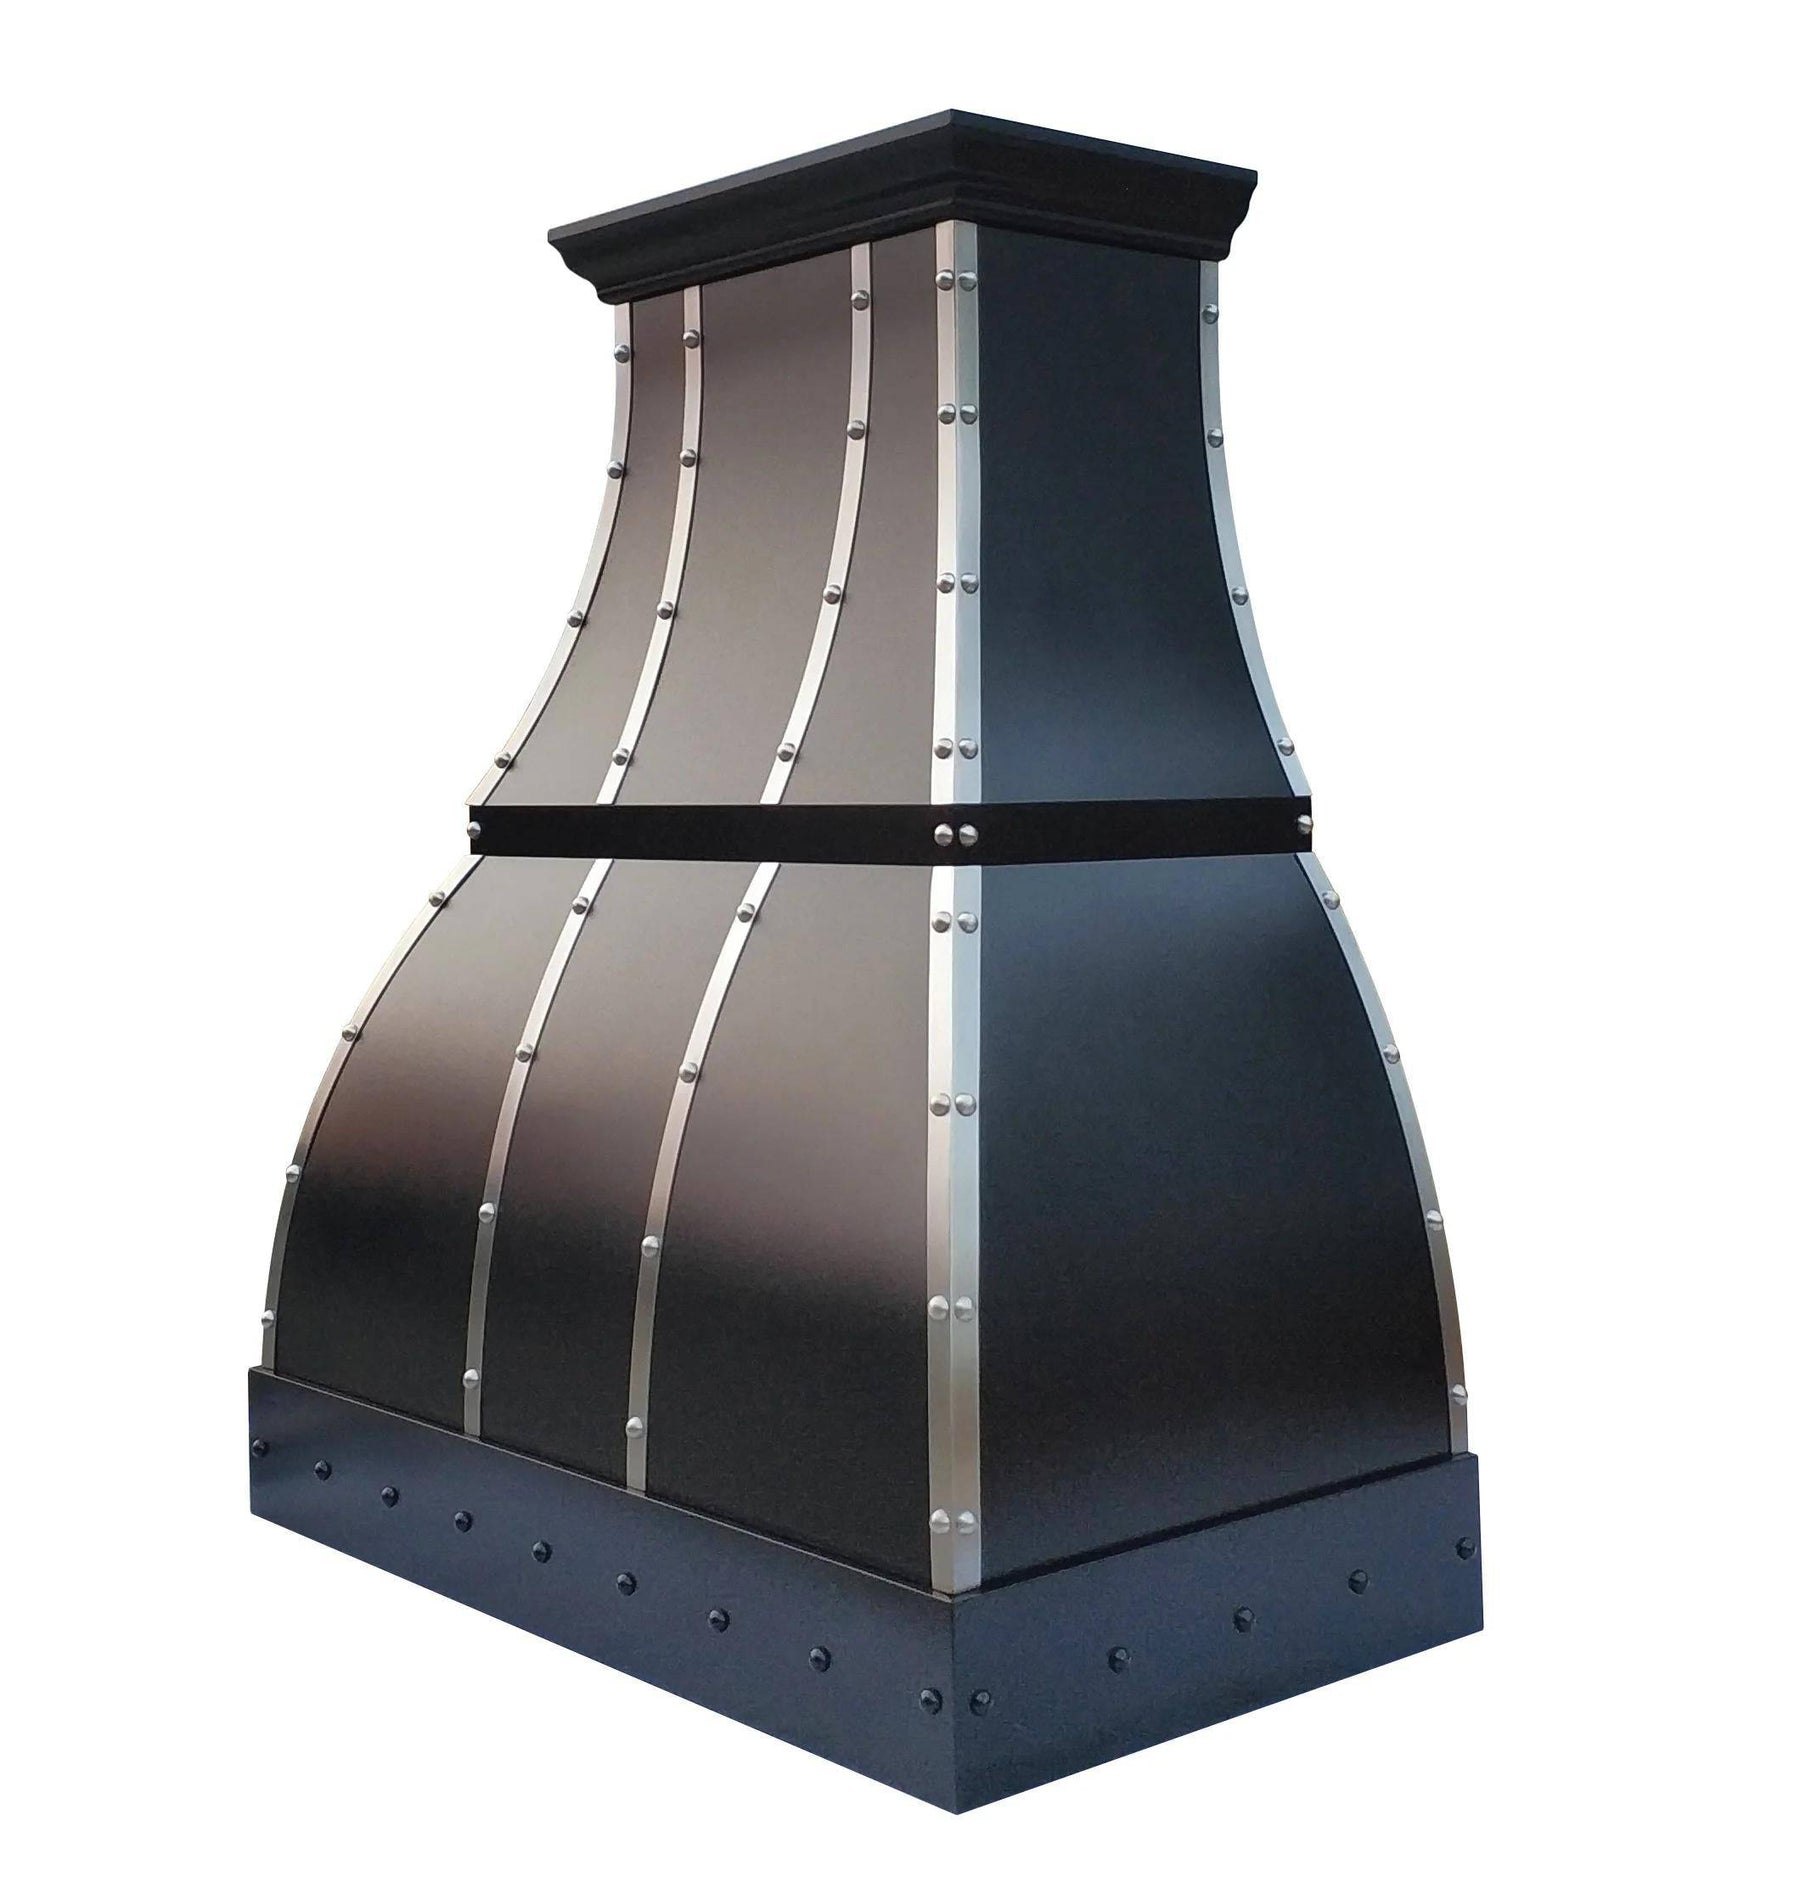 Fobest Custom Handcrafted Black Stainless Steel Range Hood FSS-108 - Stainless Steel Range Hood-Fobest Appliance